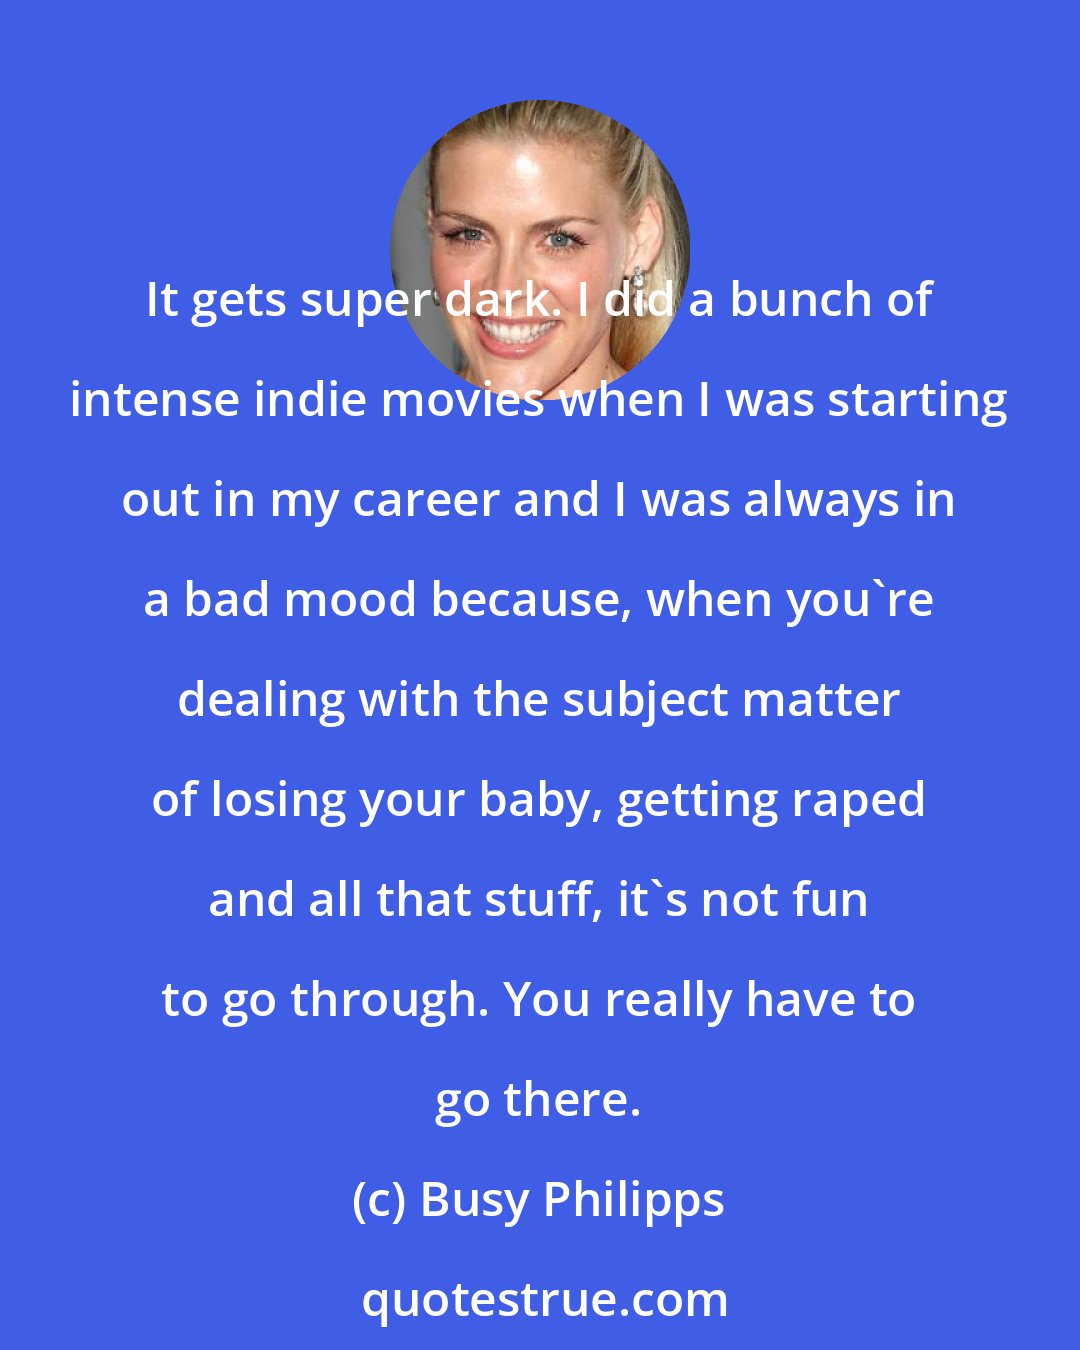 Busy Philipps: It gets super dark. I did a bunch of intense indie movies when I was starting out in my career and I was always in a bad mood because, when you're dealing with the subject matter of losing your baby, getting raped and all that stuff, it's not fun to go through. You really have to go there.